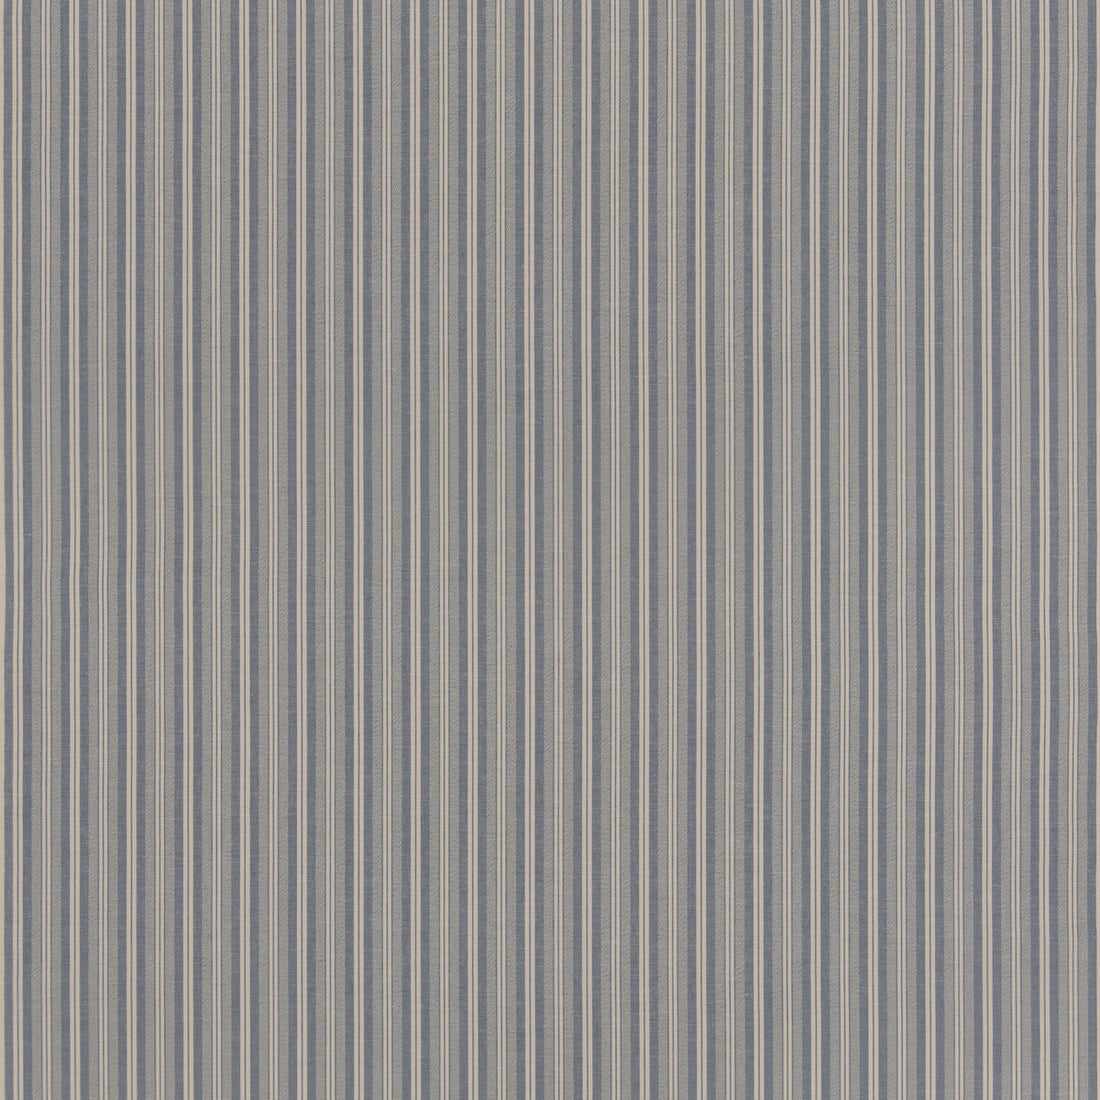 Laverton Stripe fabric in denim color - pattern BF11037.640.0 - by G P &amp; J Baker in the Baker House Plain &amp; Stripe II collection